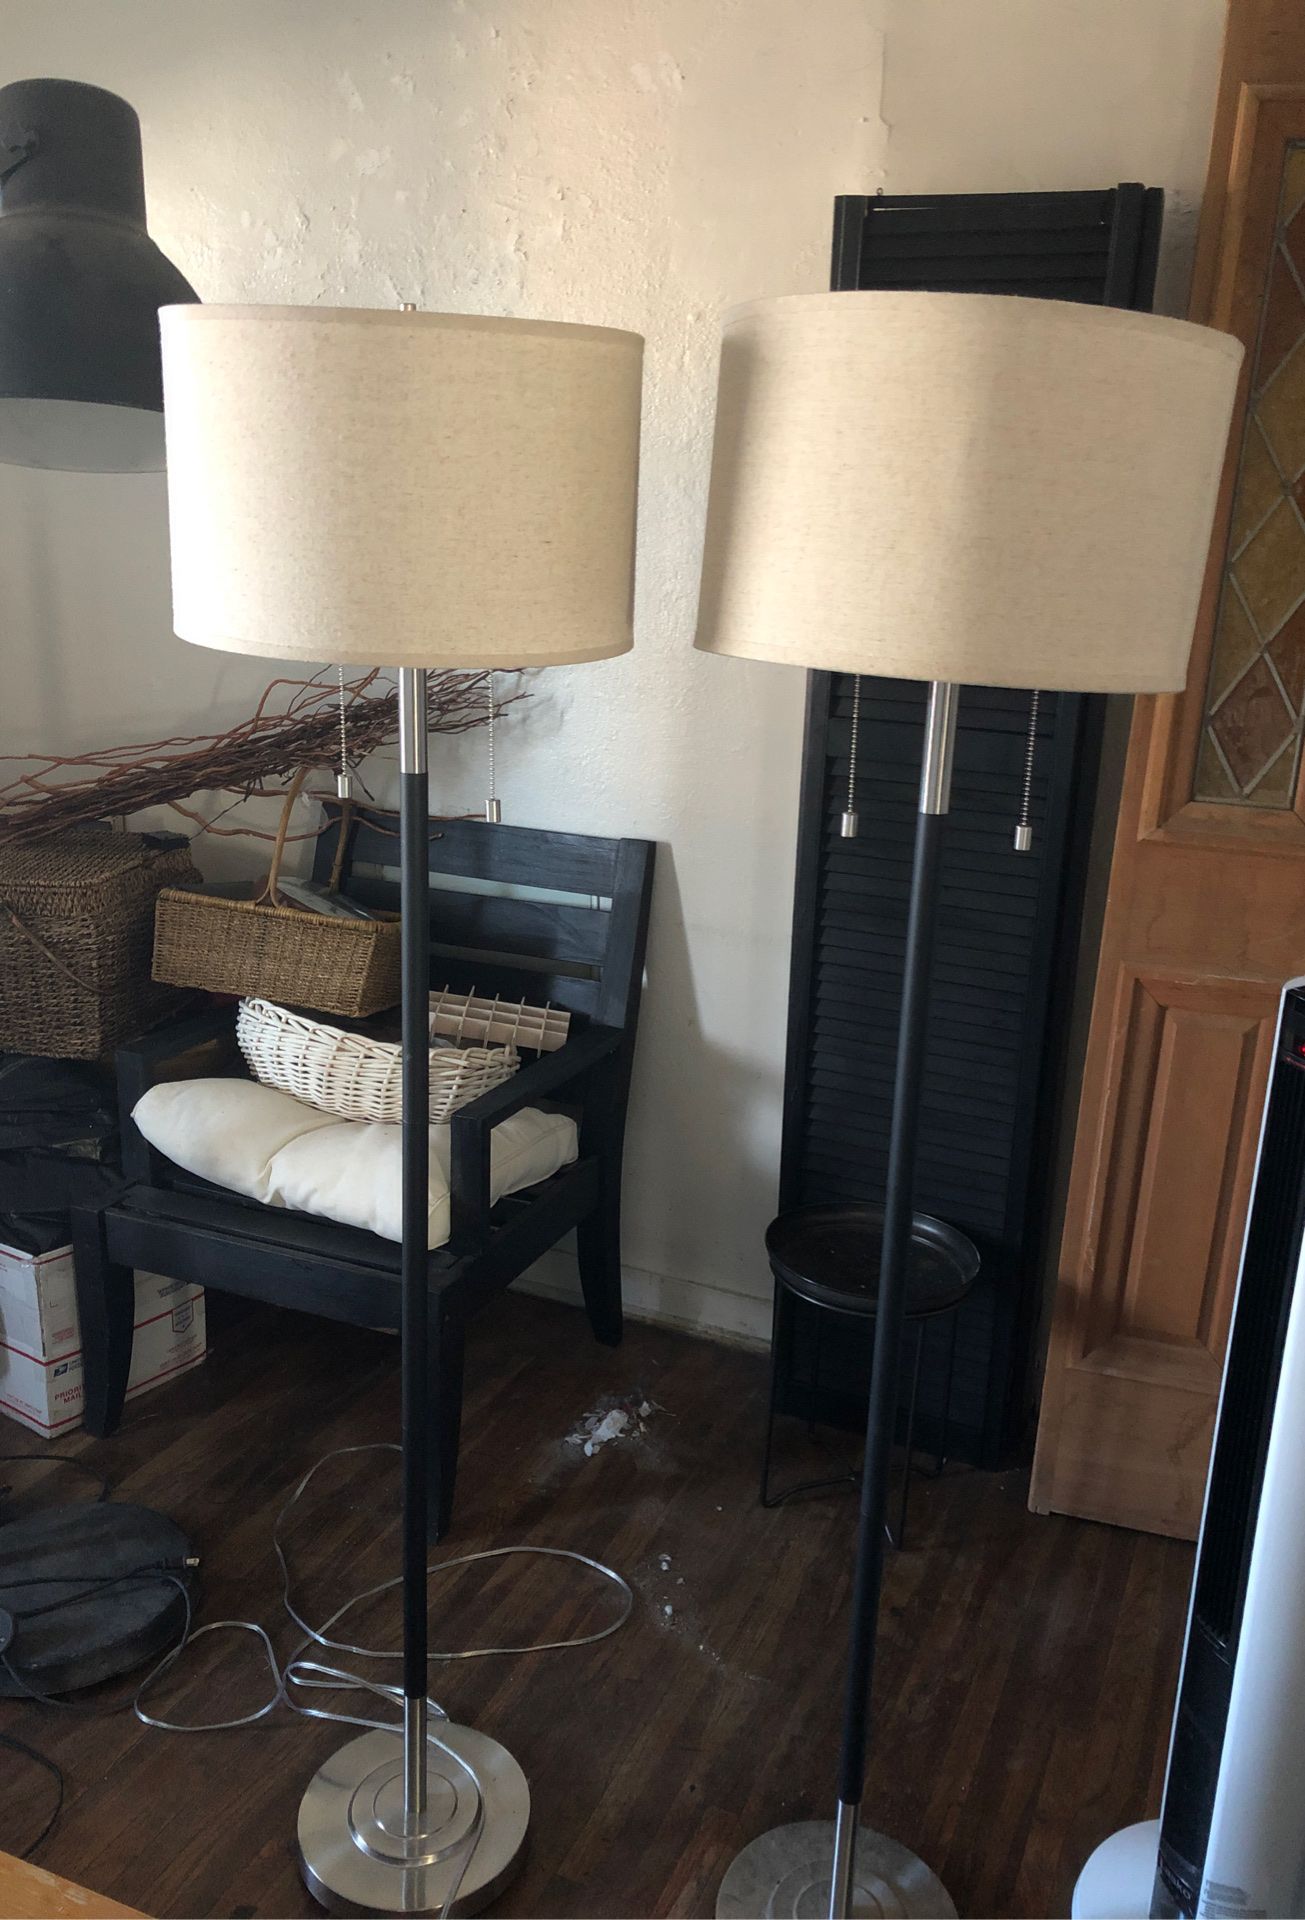 Floor lamps 62” new with shade